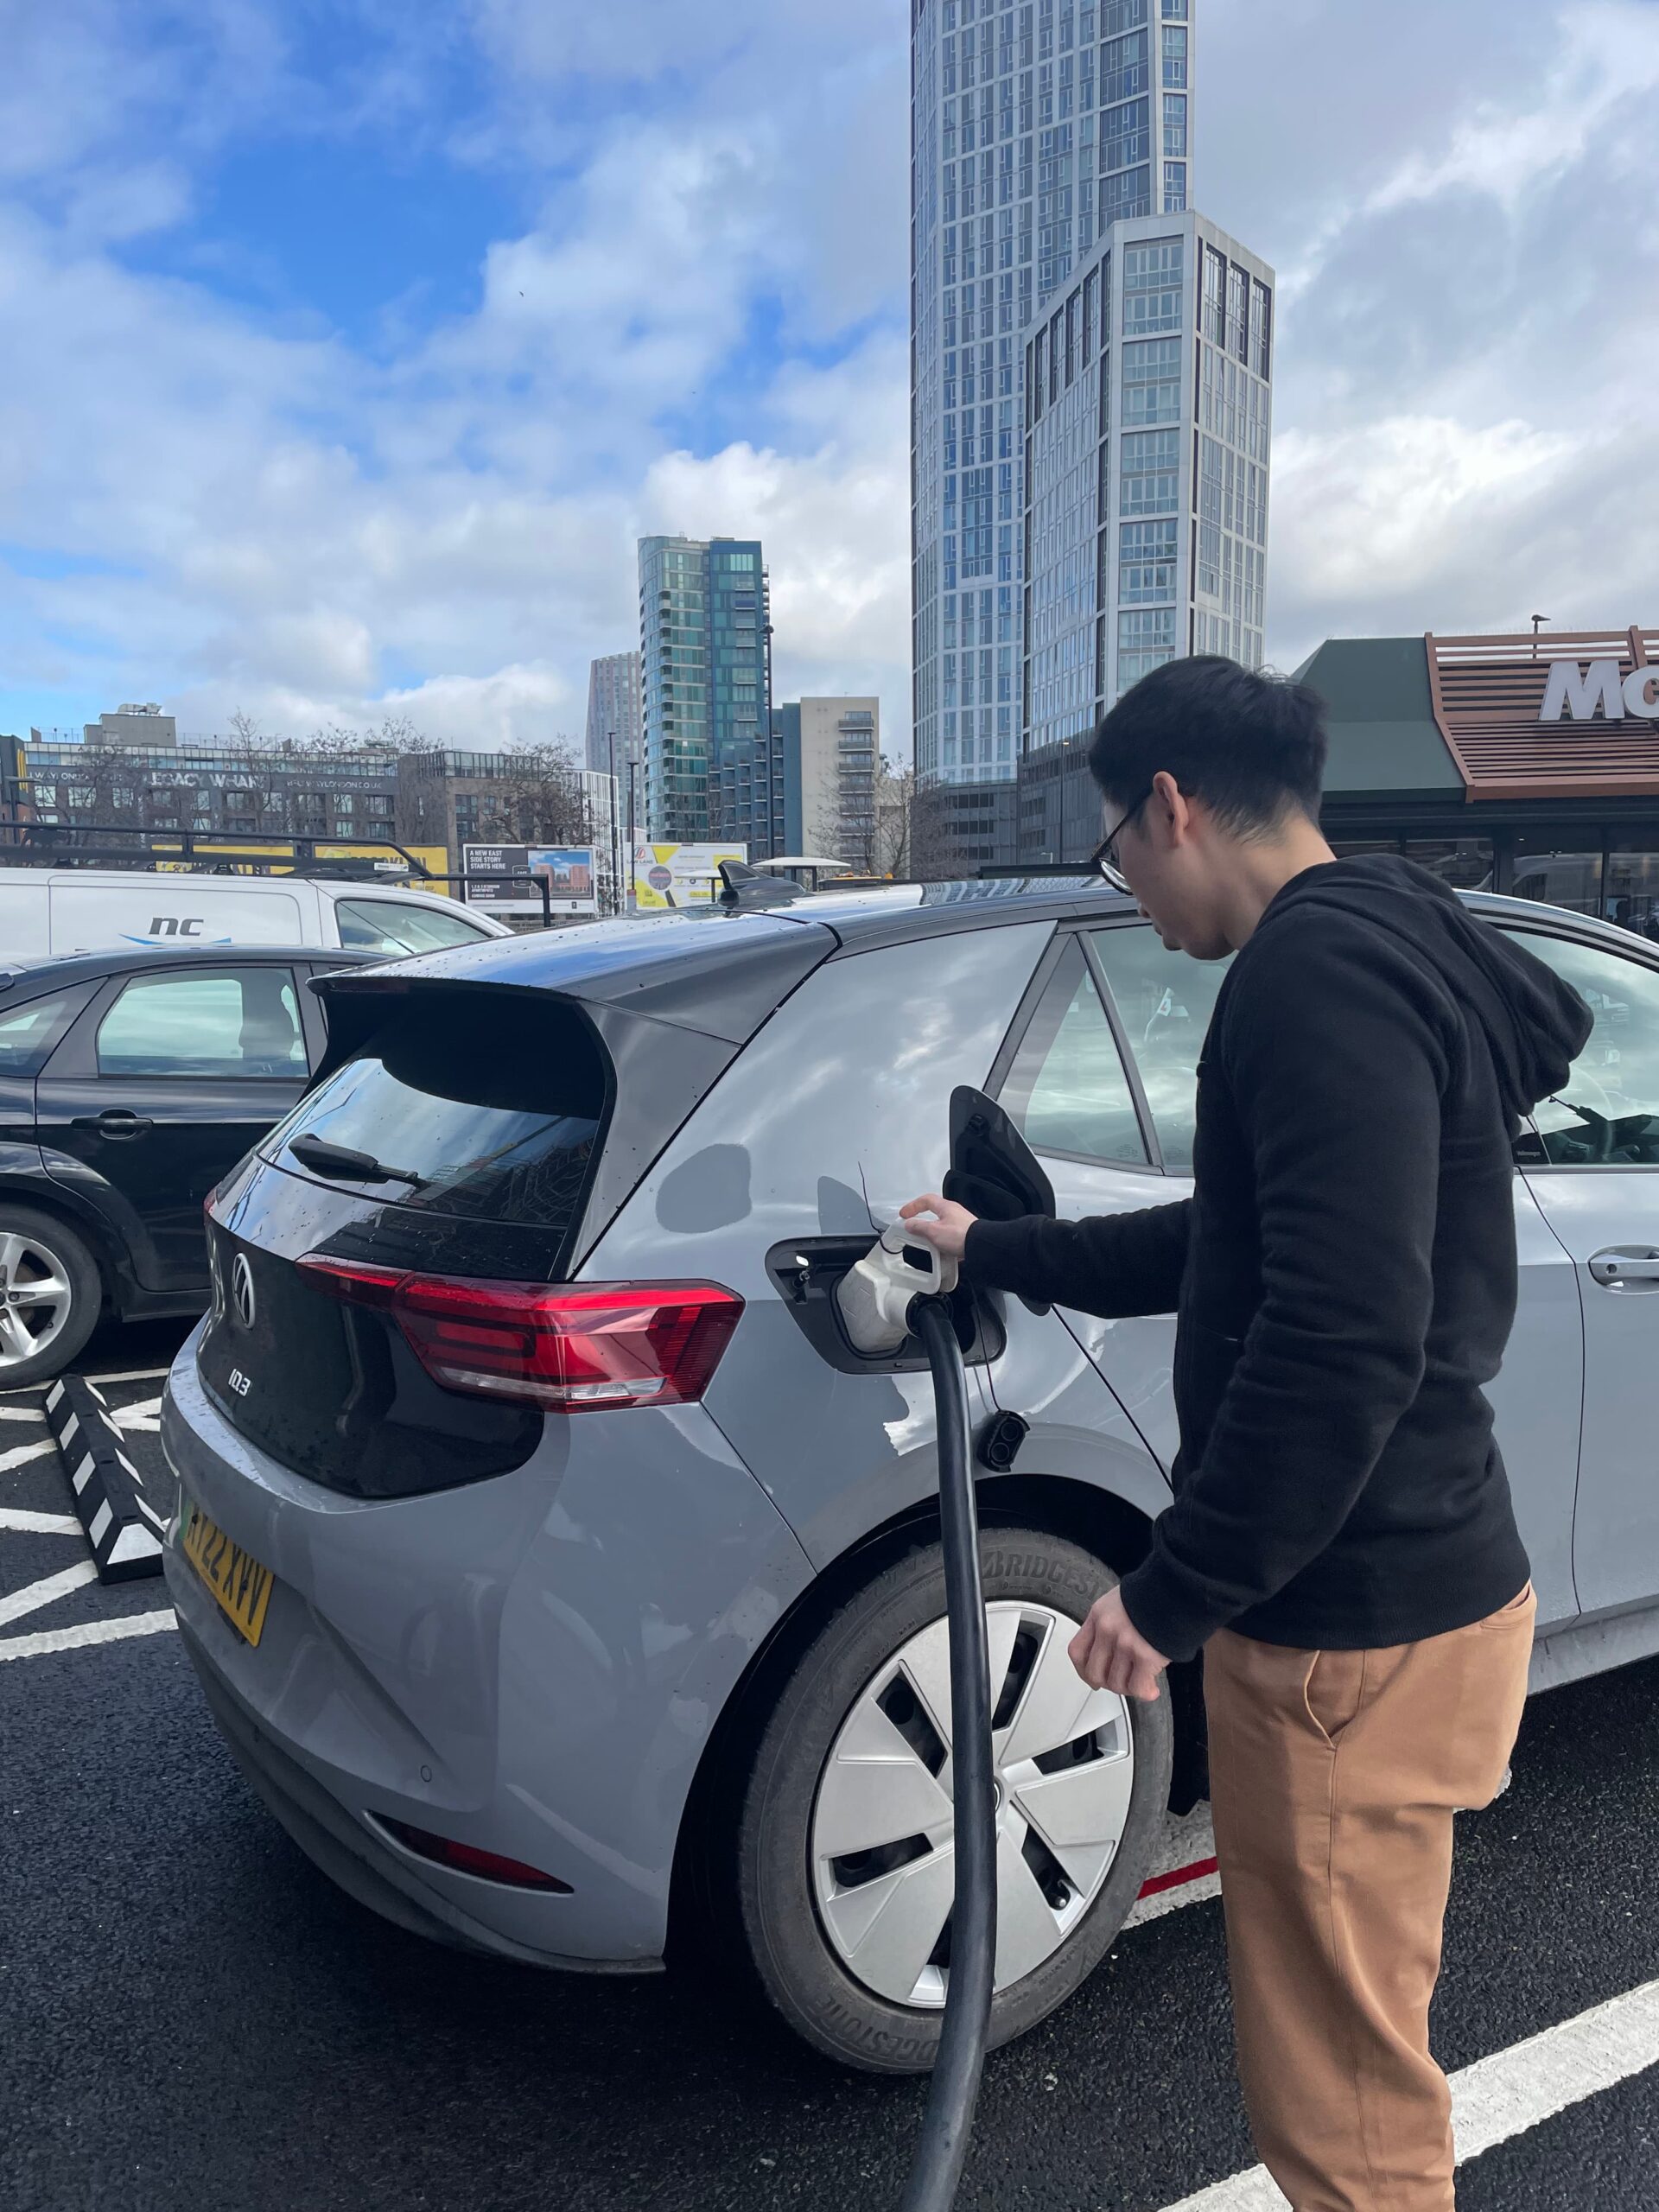 Elvin looks at the car whilst connecting the charger cable